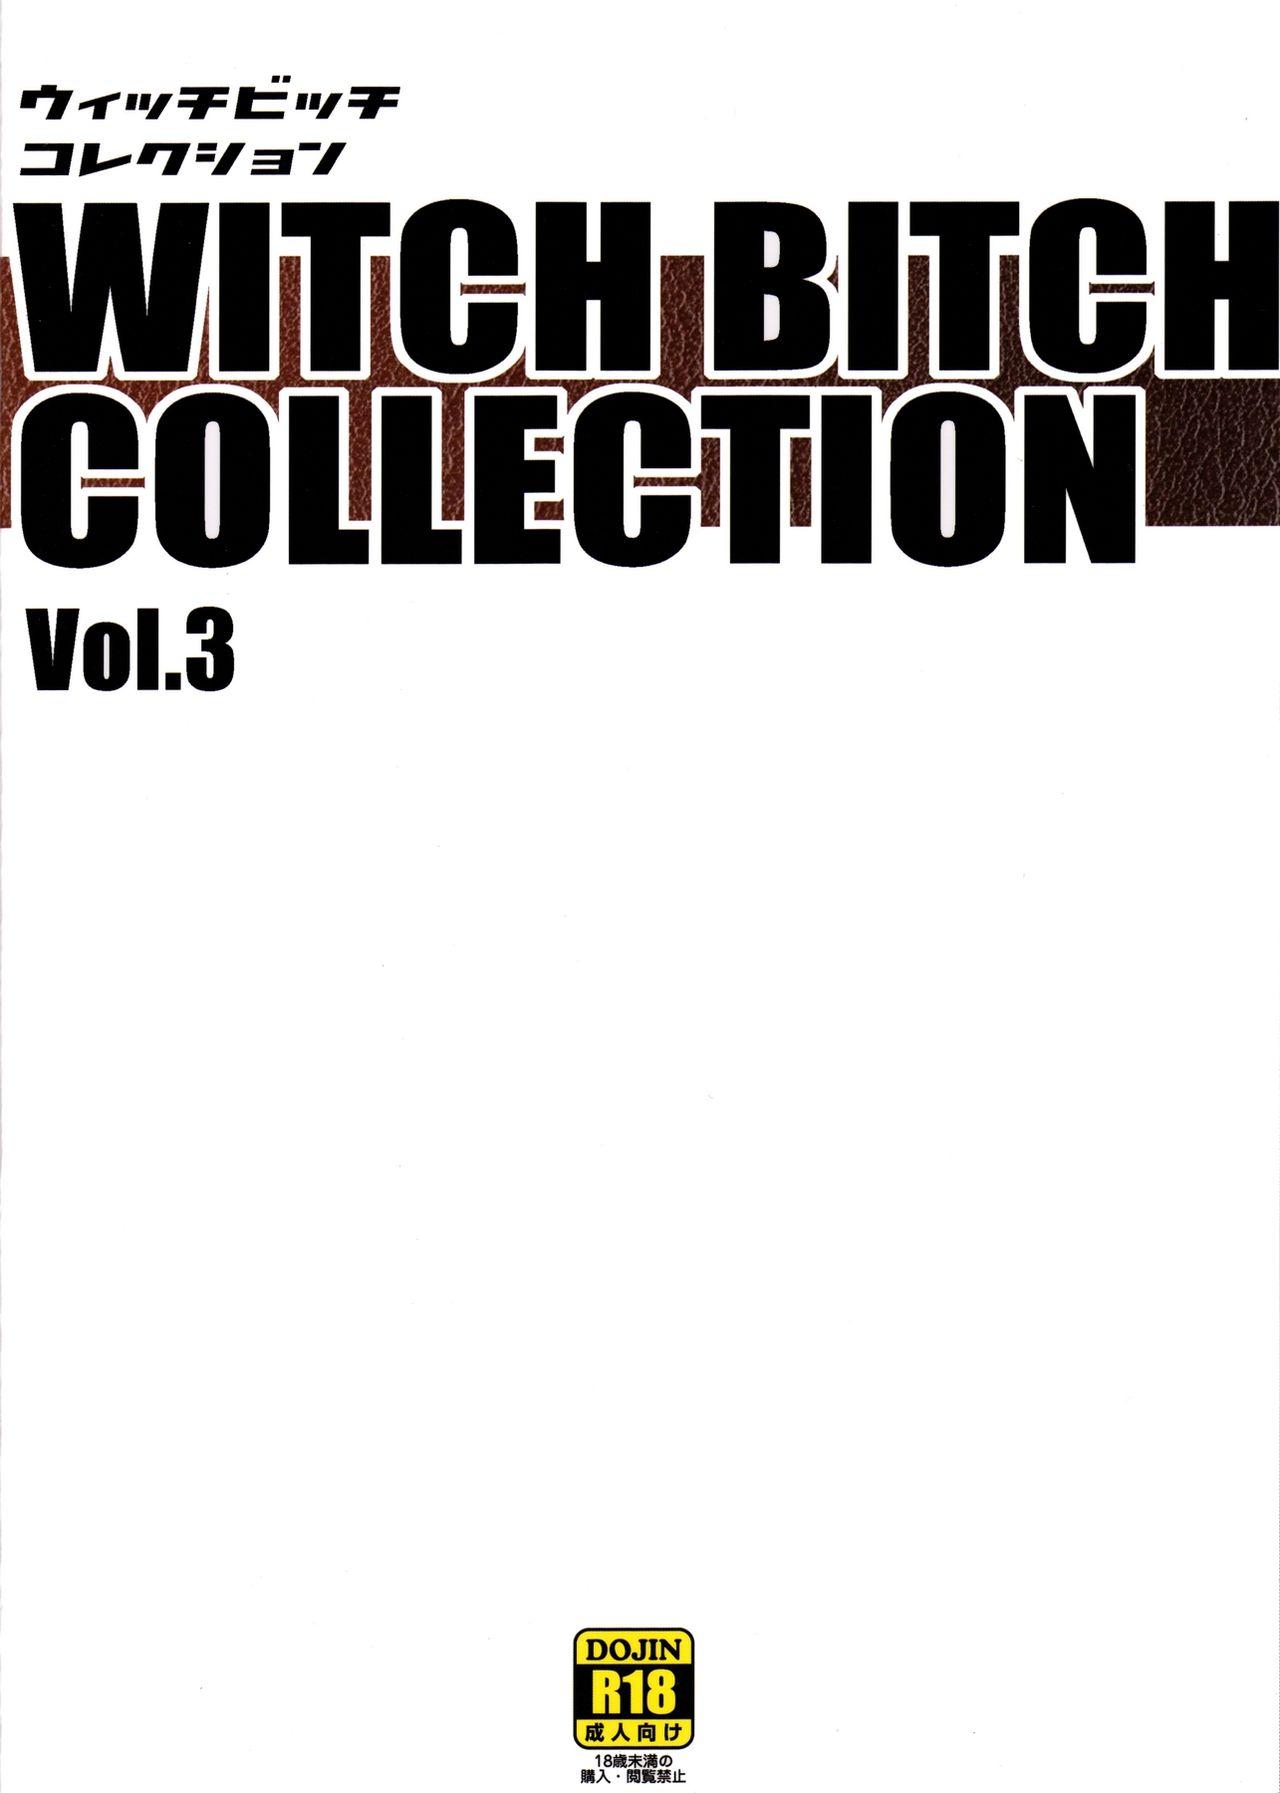 Coeds Witch Bitch Collection Vol. 3 - Fairy tail Phat Ass - Page 51